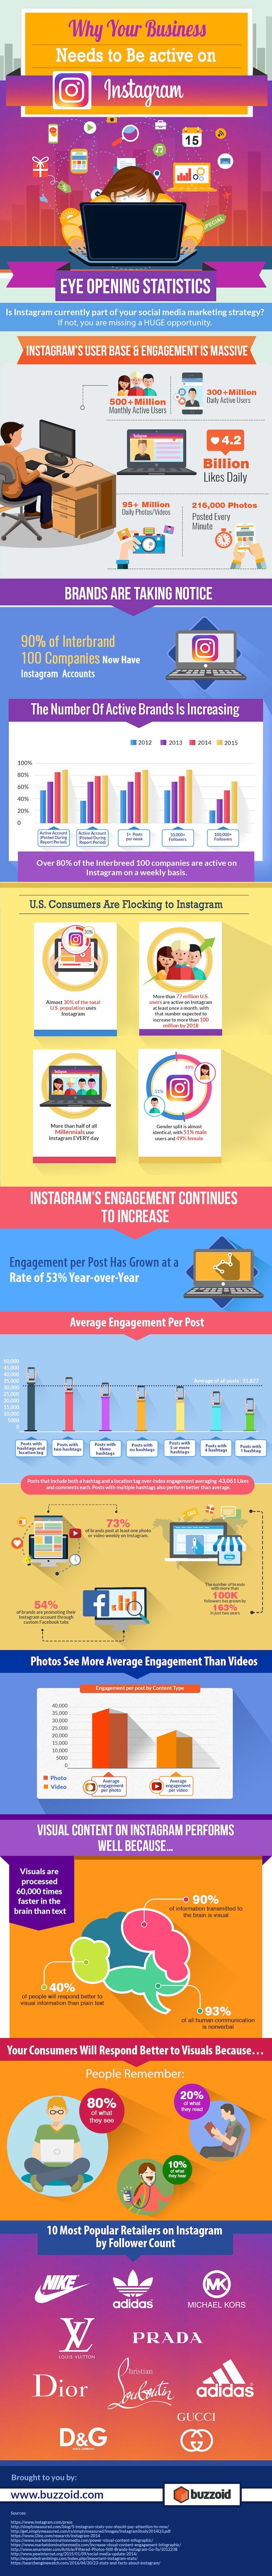 5a56c3b1419883d15b94bb14c652f773--marketing-online-social-media-marketing Marketing Infographic : #Infographic: 👩‍💼 Why Your Business Needs to Be Active on #Instagram ...